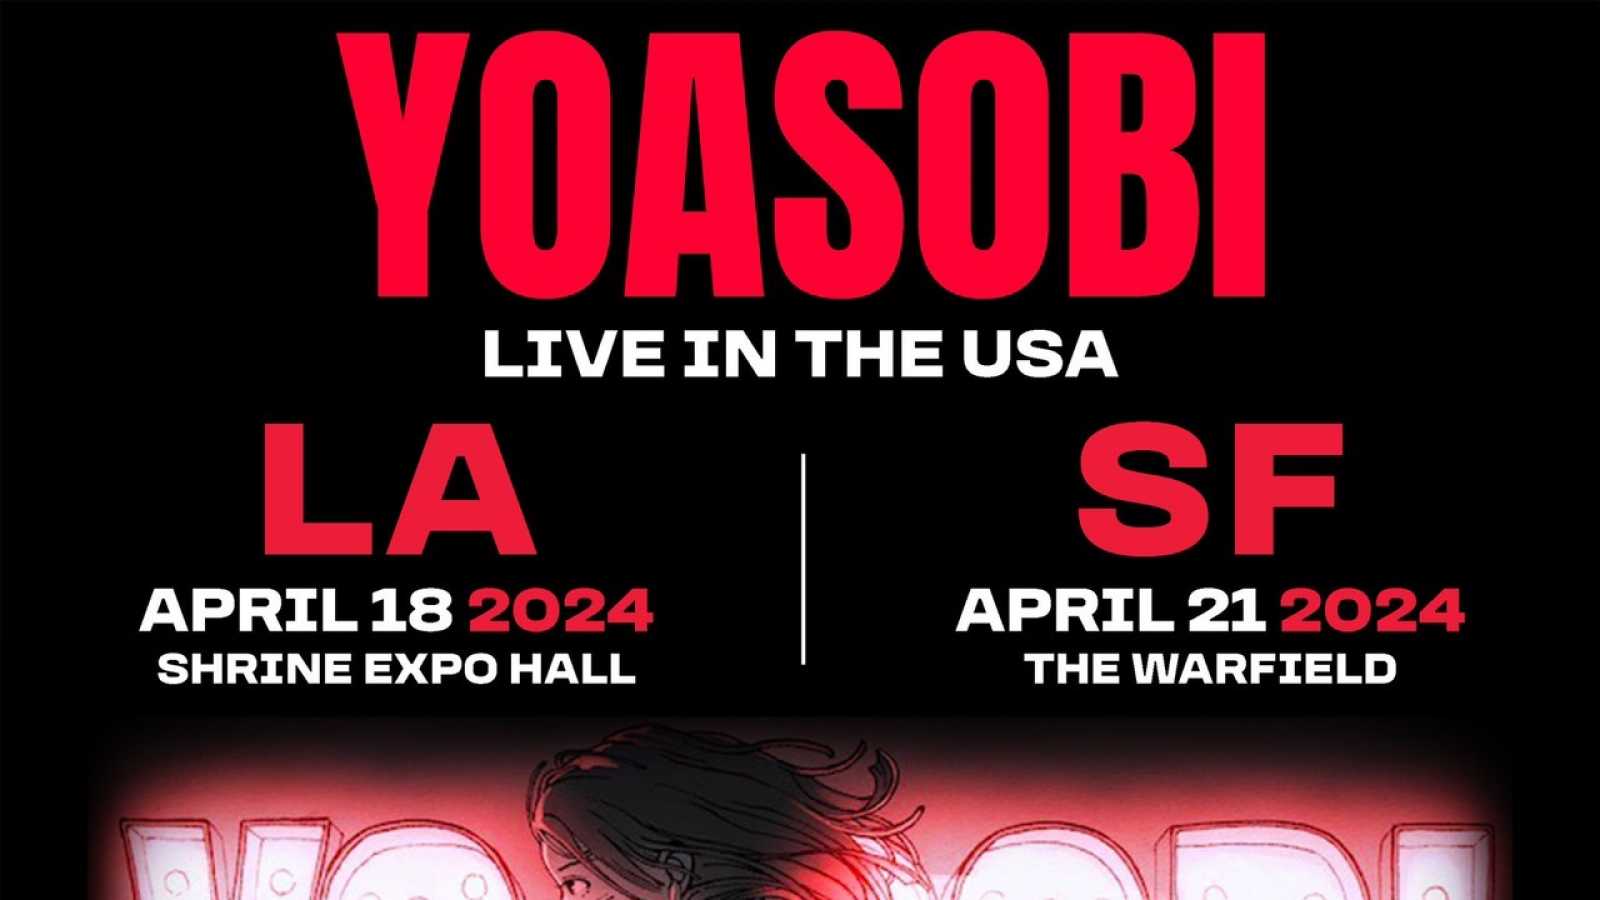 YOASOBI Announce Debut US Solo Shows © Sony Music Entertainment (Japan) Inc. All rights reserved.